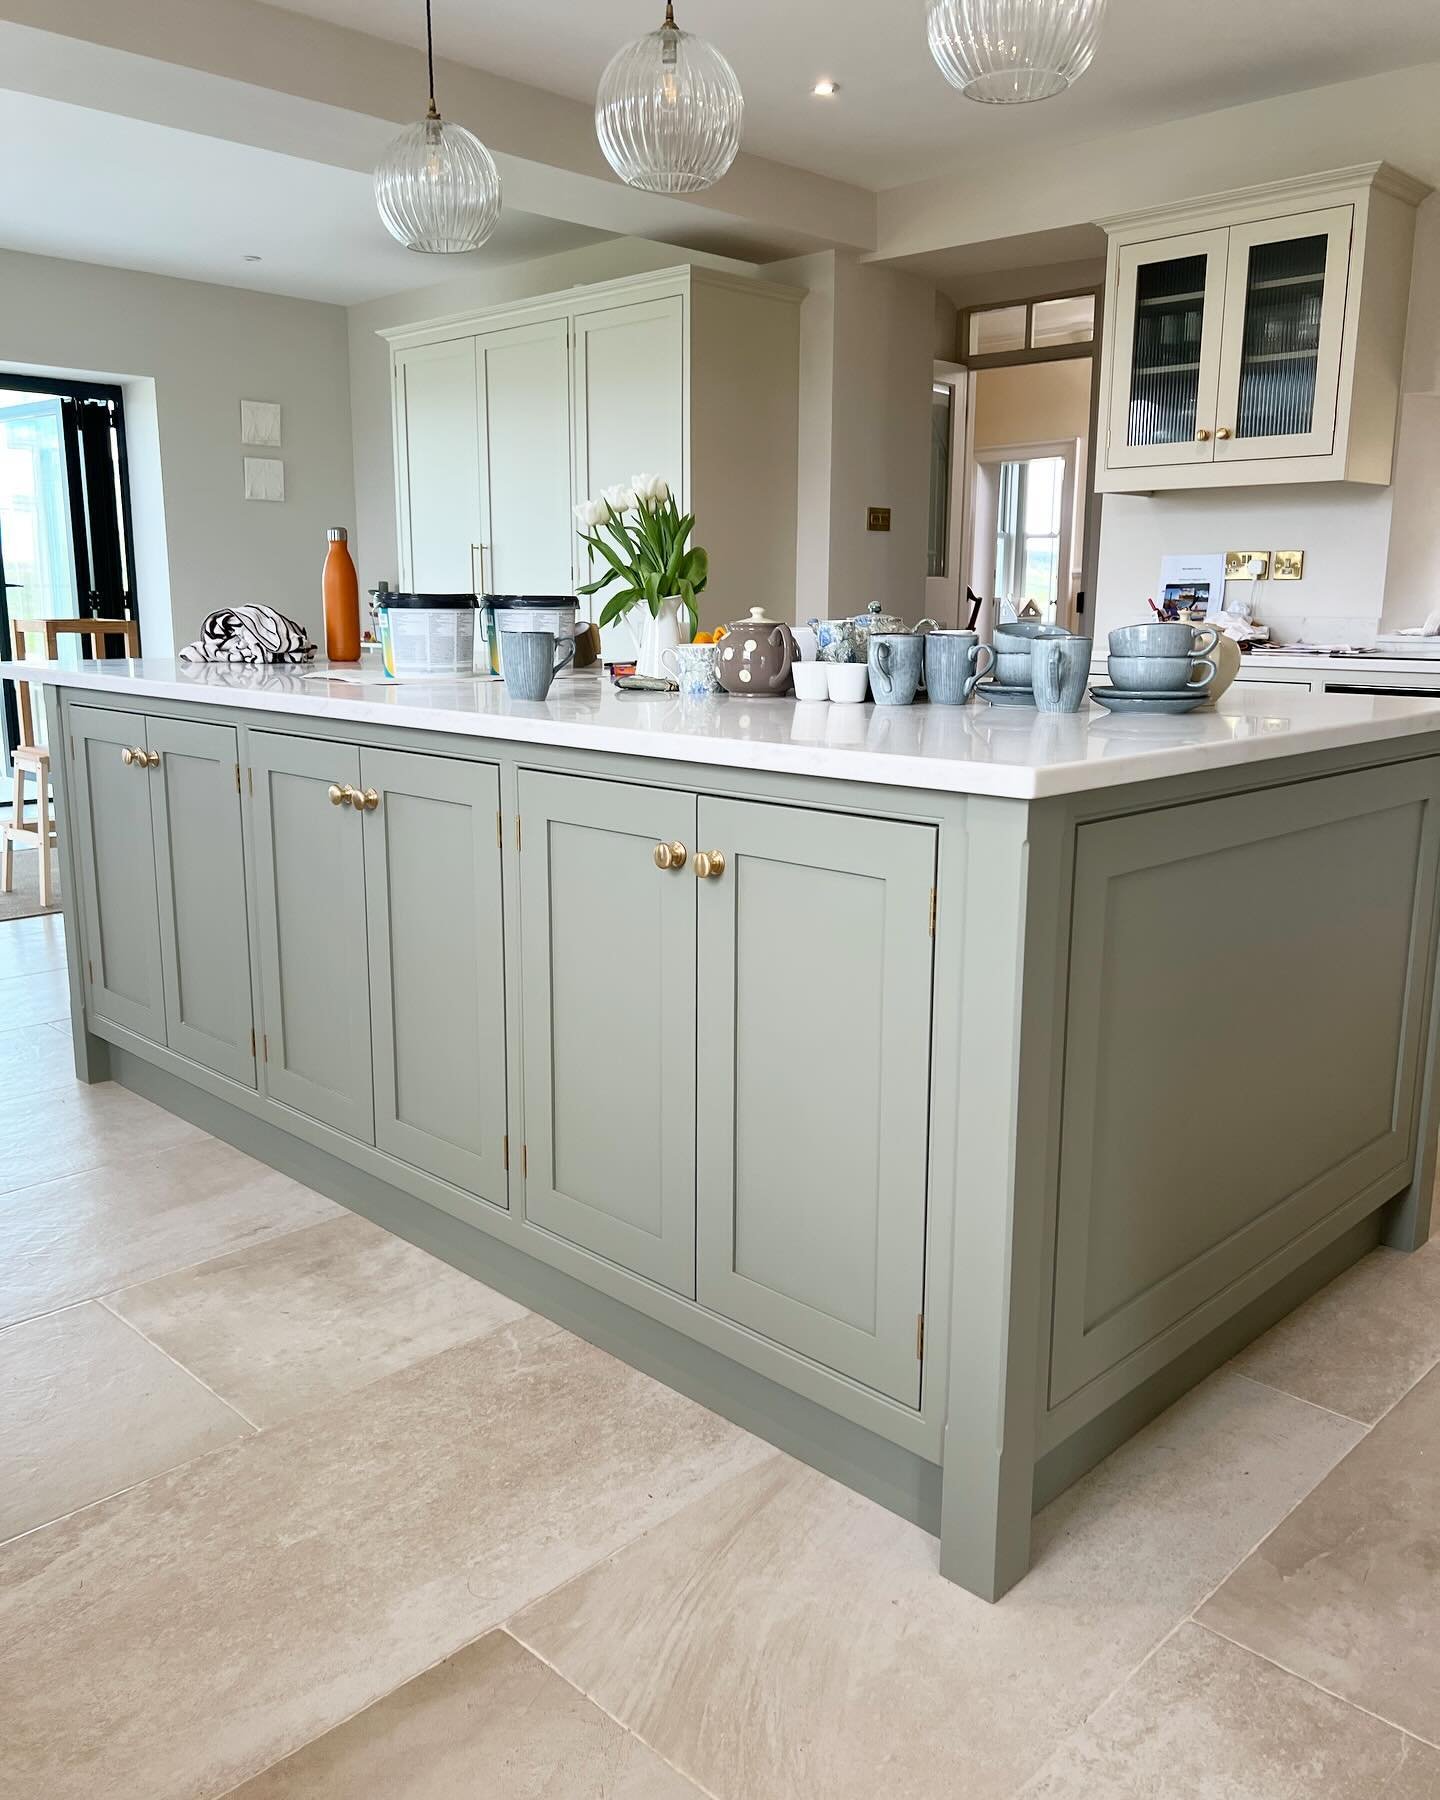 Lovely calming combination of #shadedwhite and #treron for this new kitchen. A hand painted finish for the final touch to bring it all together. 

#handpaintedkitchen #paintedkitchen #paintedkitchencabinets #handpaintedfurniture #farrowandballtreron 